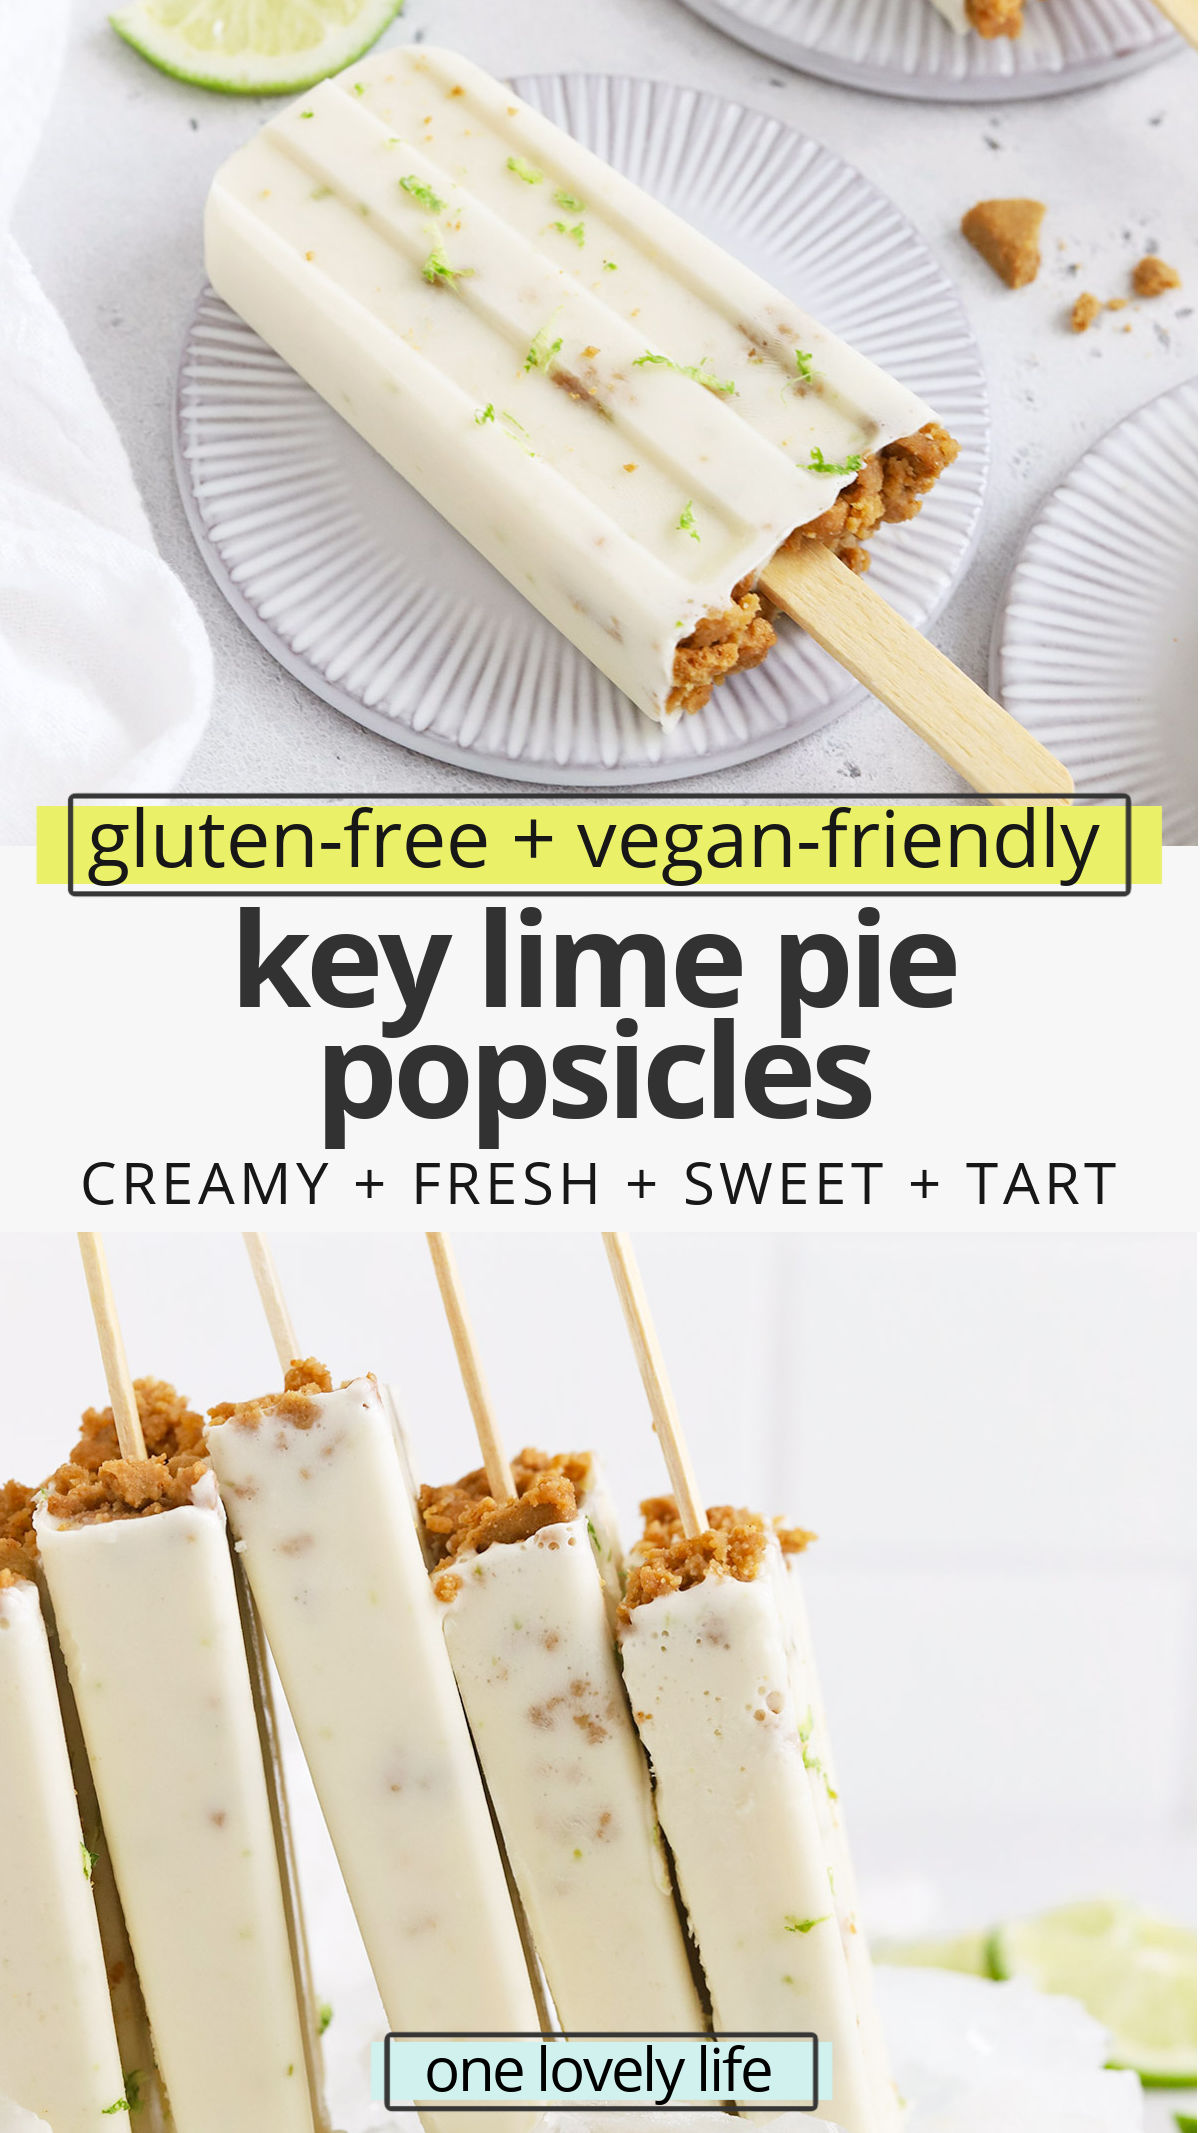 Key Lime Pie Popsicles - These creamy lime popsicles taste like a slice of key lime pie! A perfect summer treat! (Gluten-Free, Vegan-Friendly) // key lime pie on a stick // vegan lime popsicles // healthy lime popsicles // key lime pie ice pop recipe